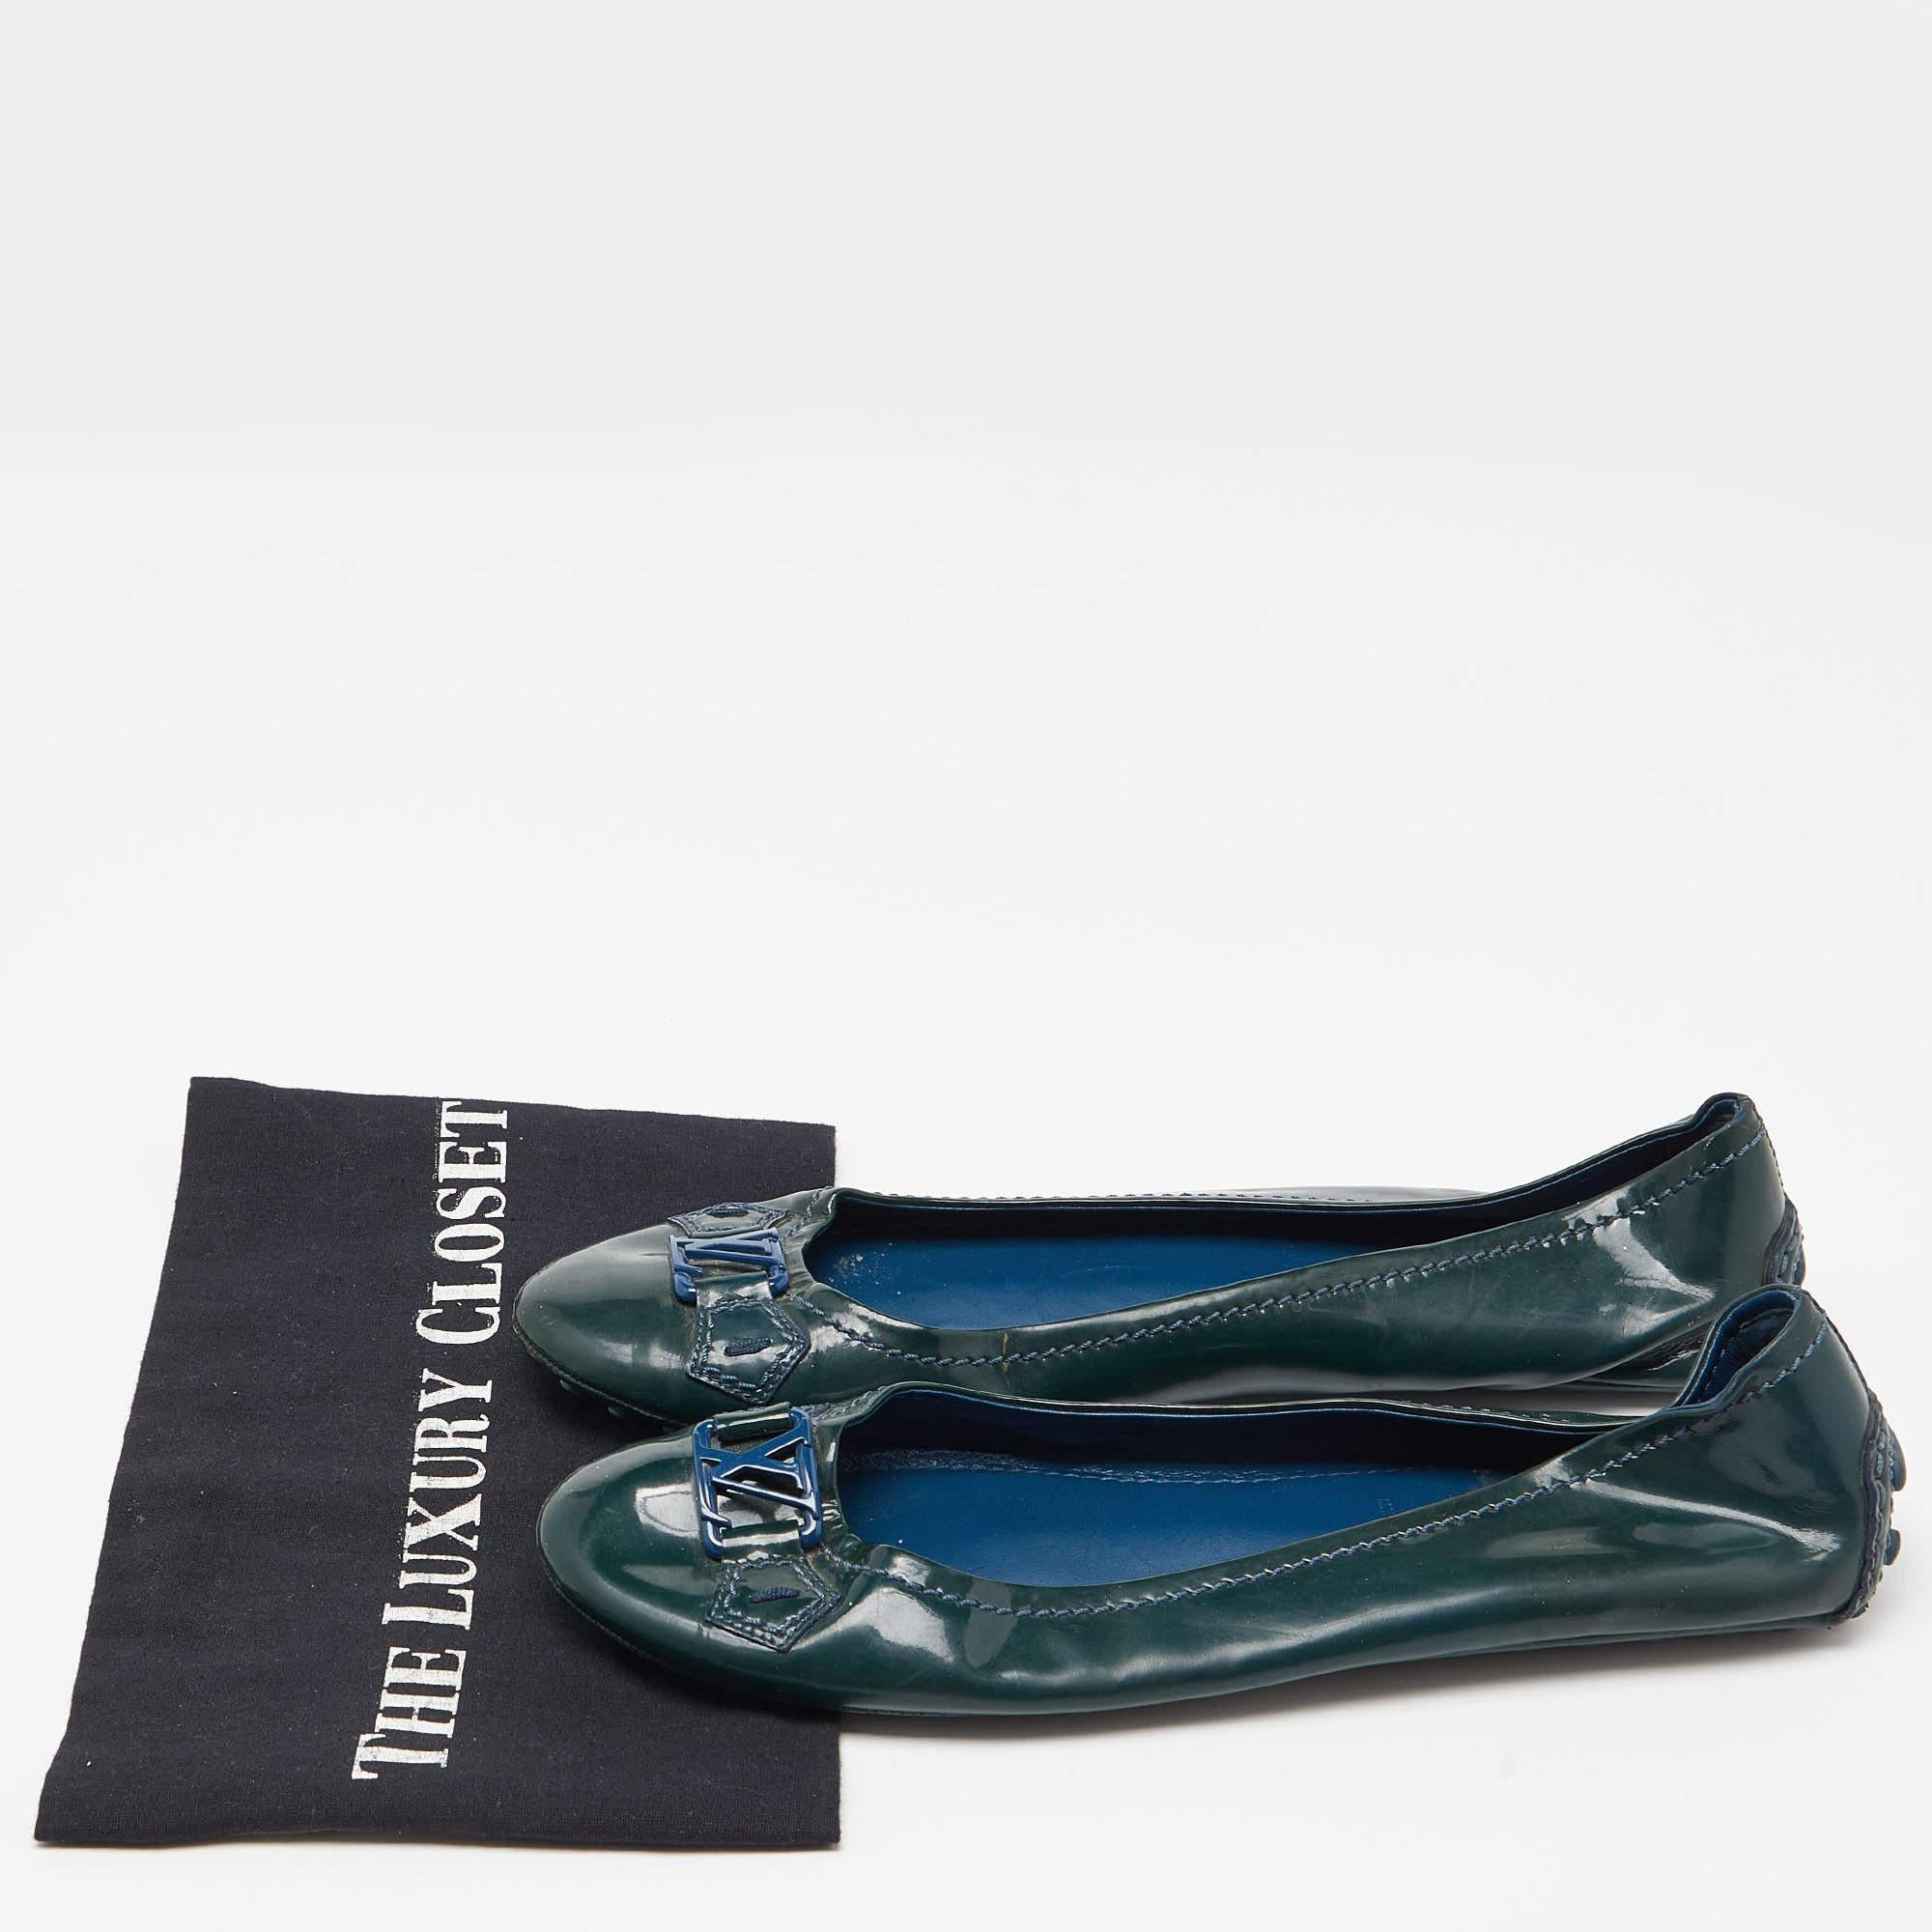 Louis Vuitton Dark Green Patent Leather Oxford Ballet Flats Size 39.5 For Sale 5